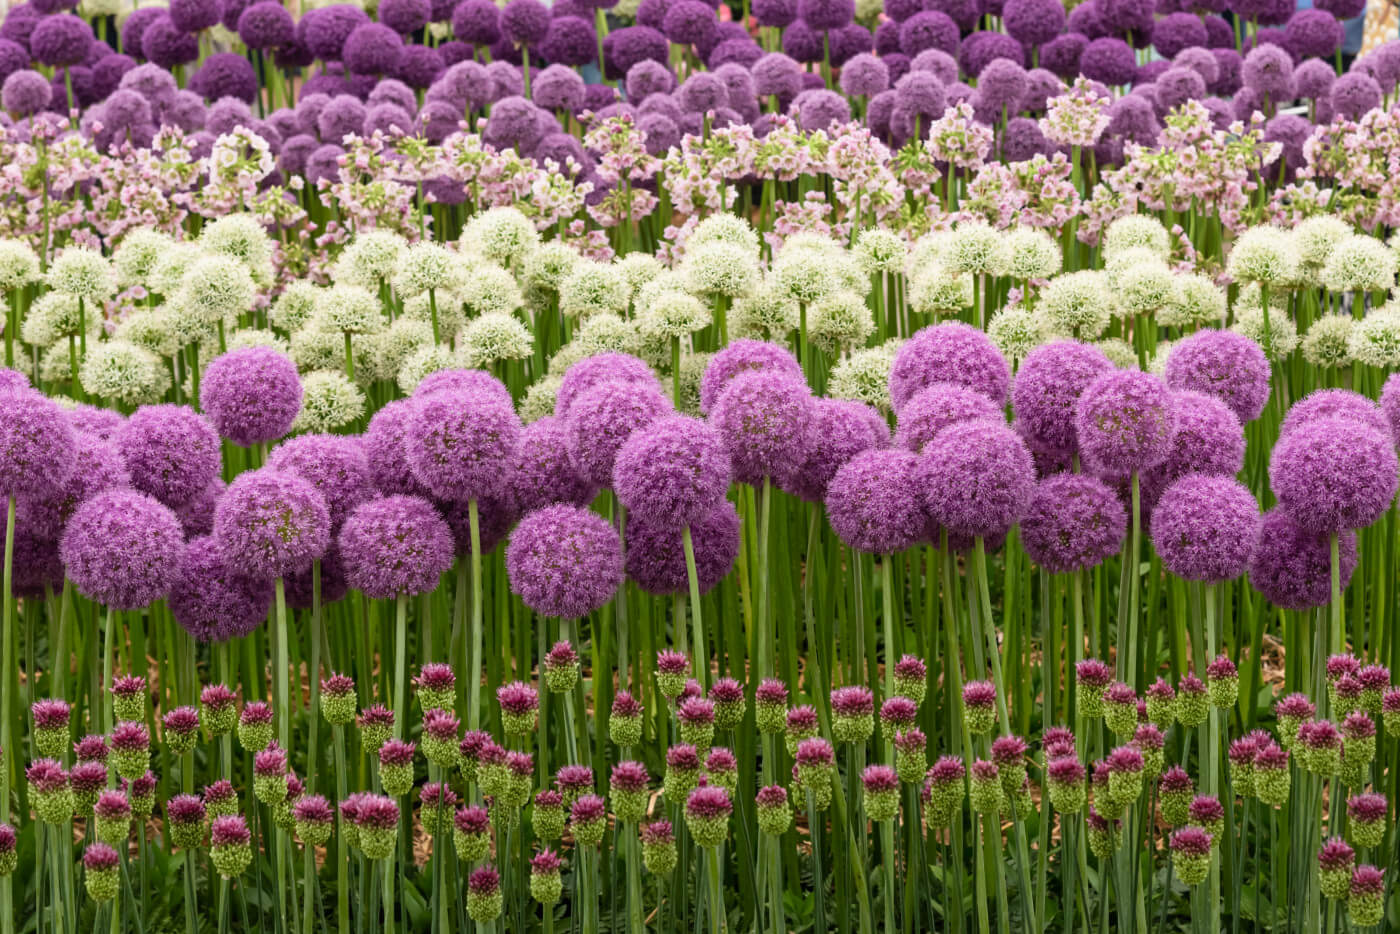 Alliums in full flower in a range of different shades of purple, pink and white